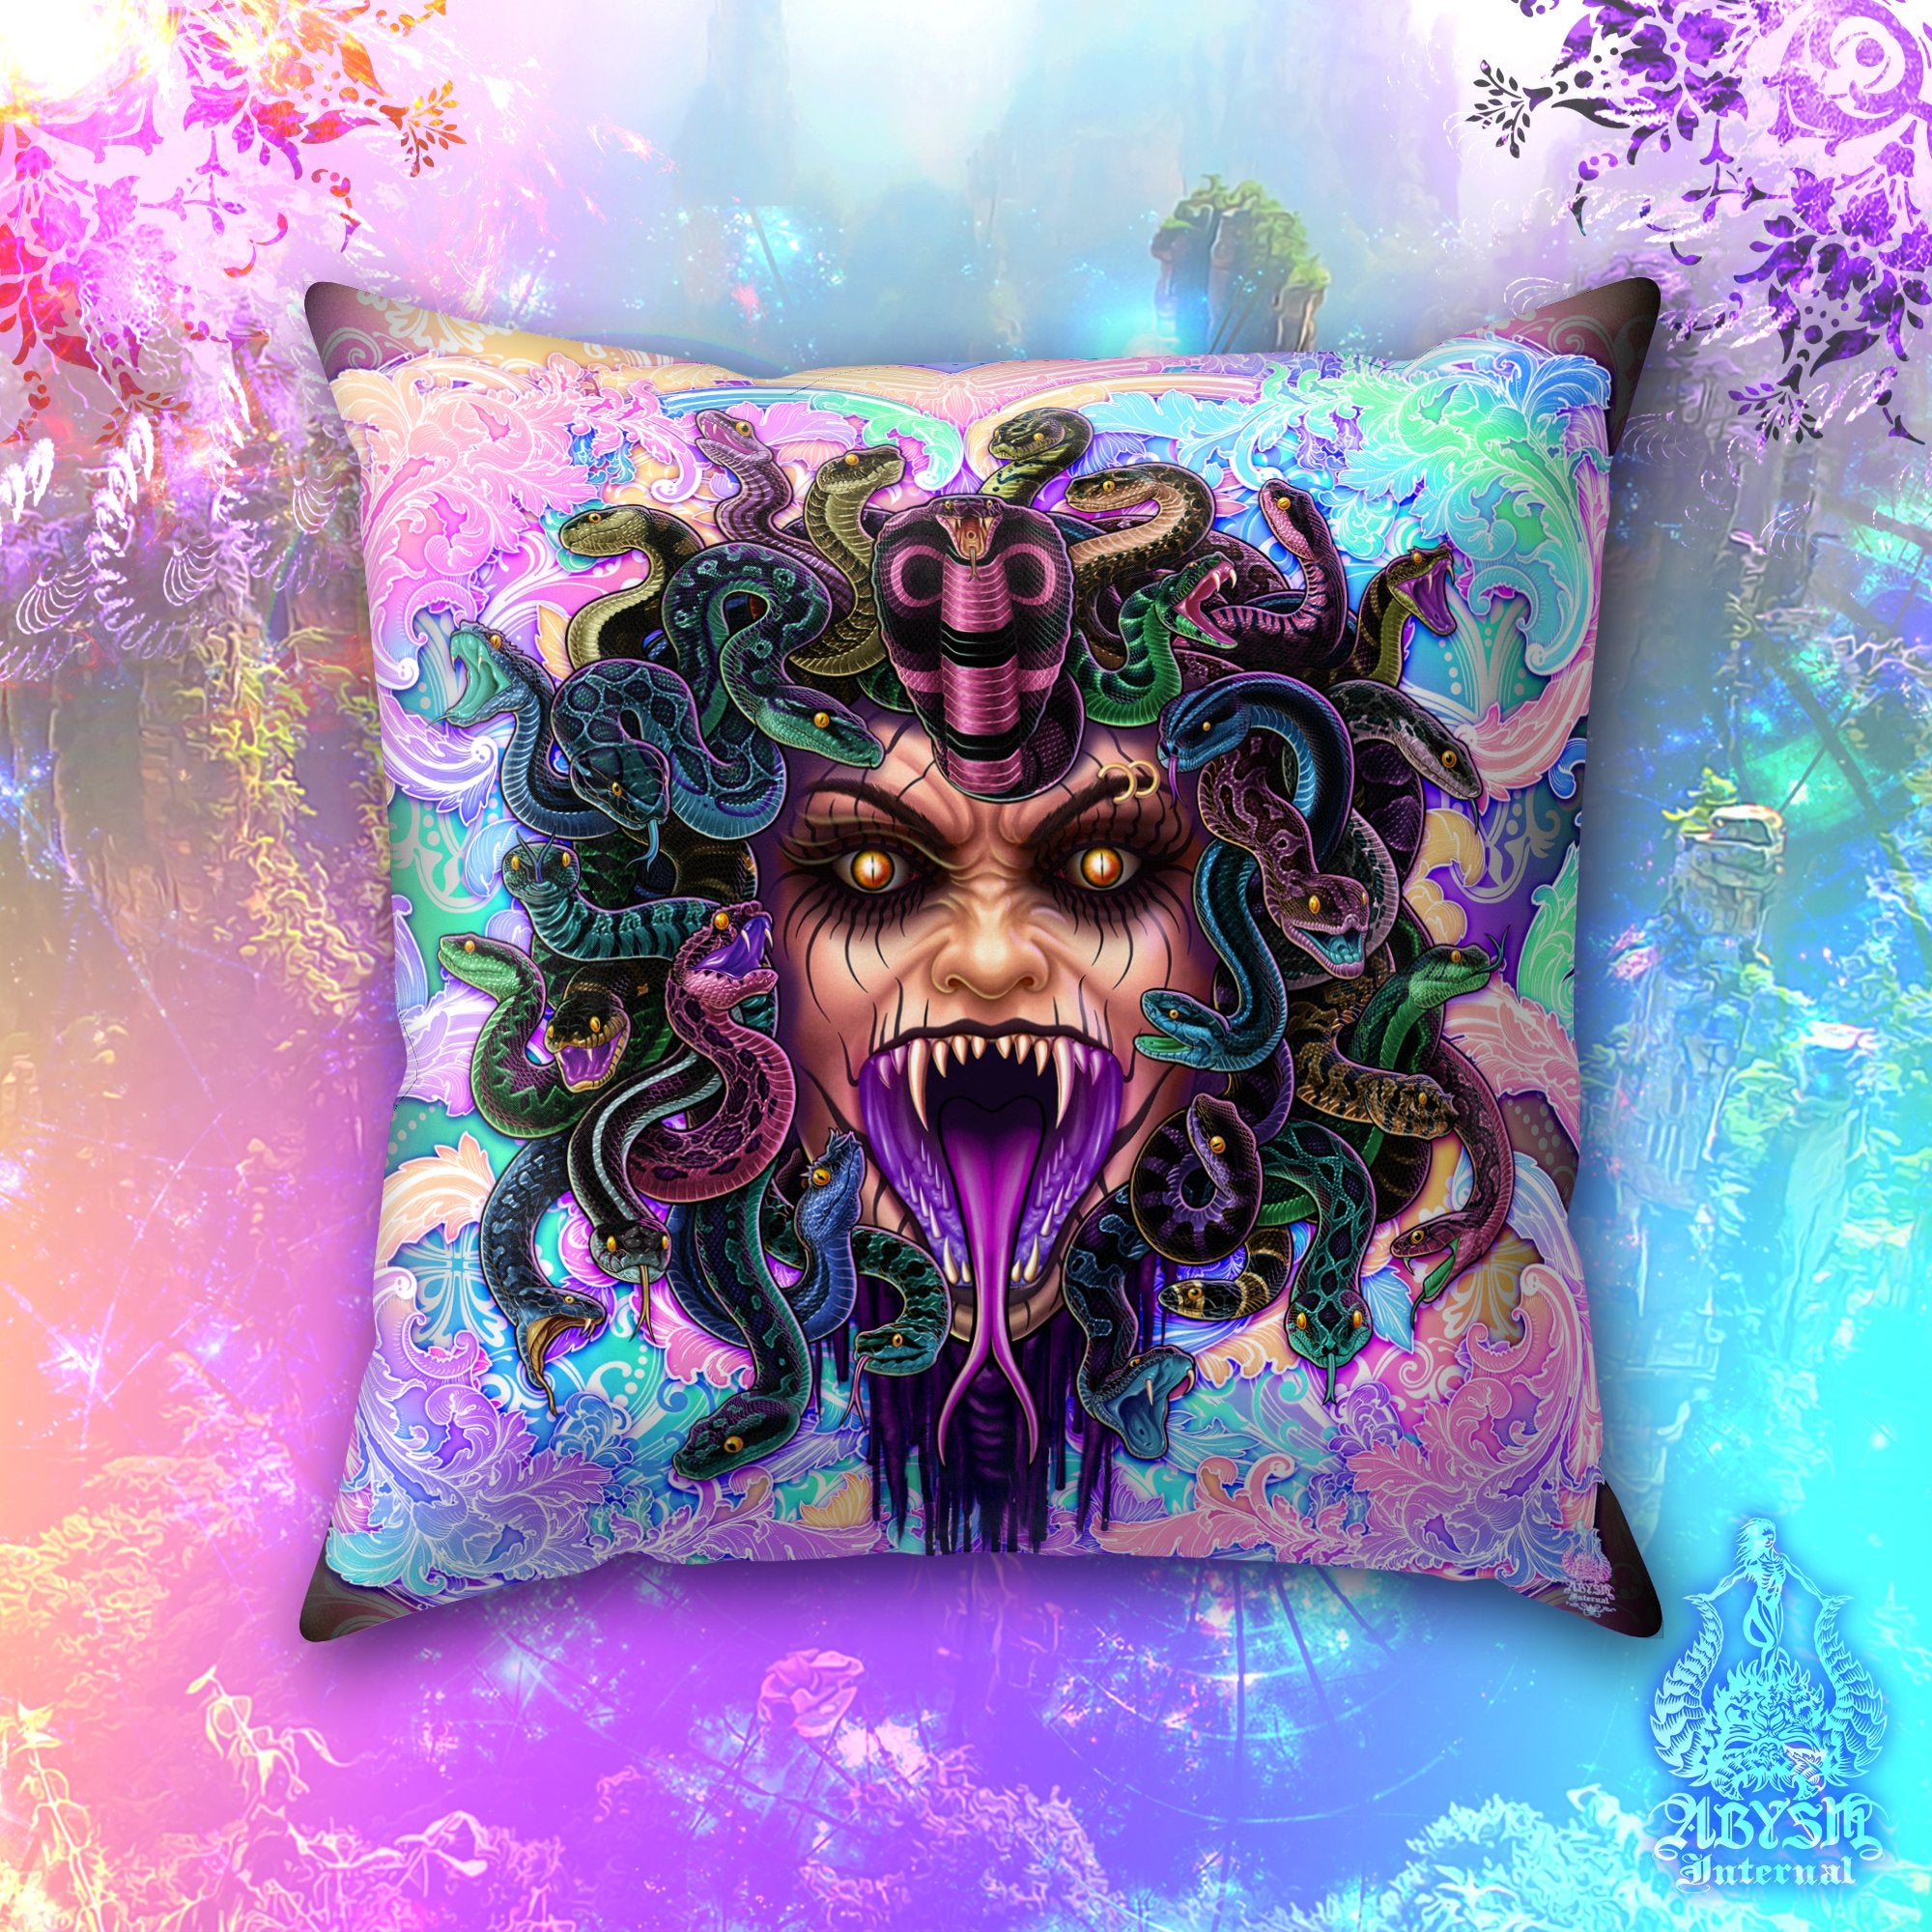 Psychedelic Medusa Throw Pillow, Decorative Accent Pillow, Square Cushion Cover, Fantasy Room Decor, Funky Home Skull Art - Pastel Punk Black, 4 Faces - Abysm Internal